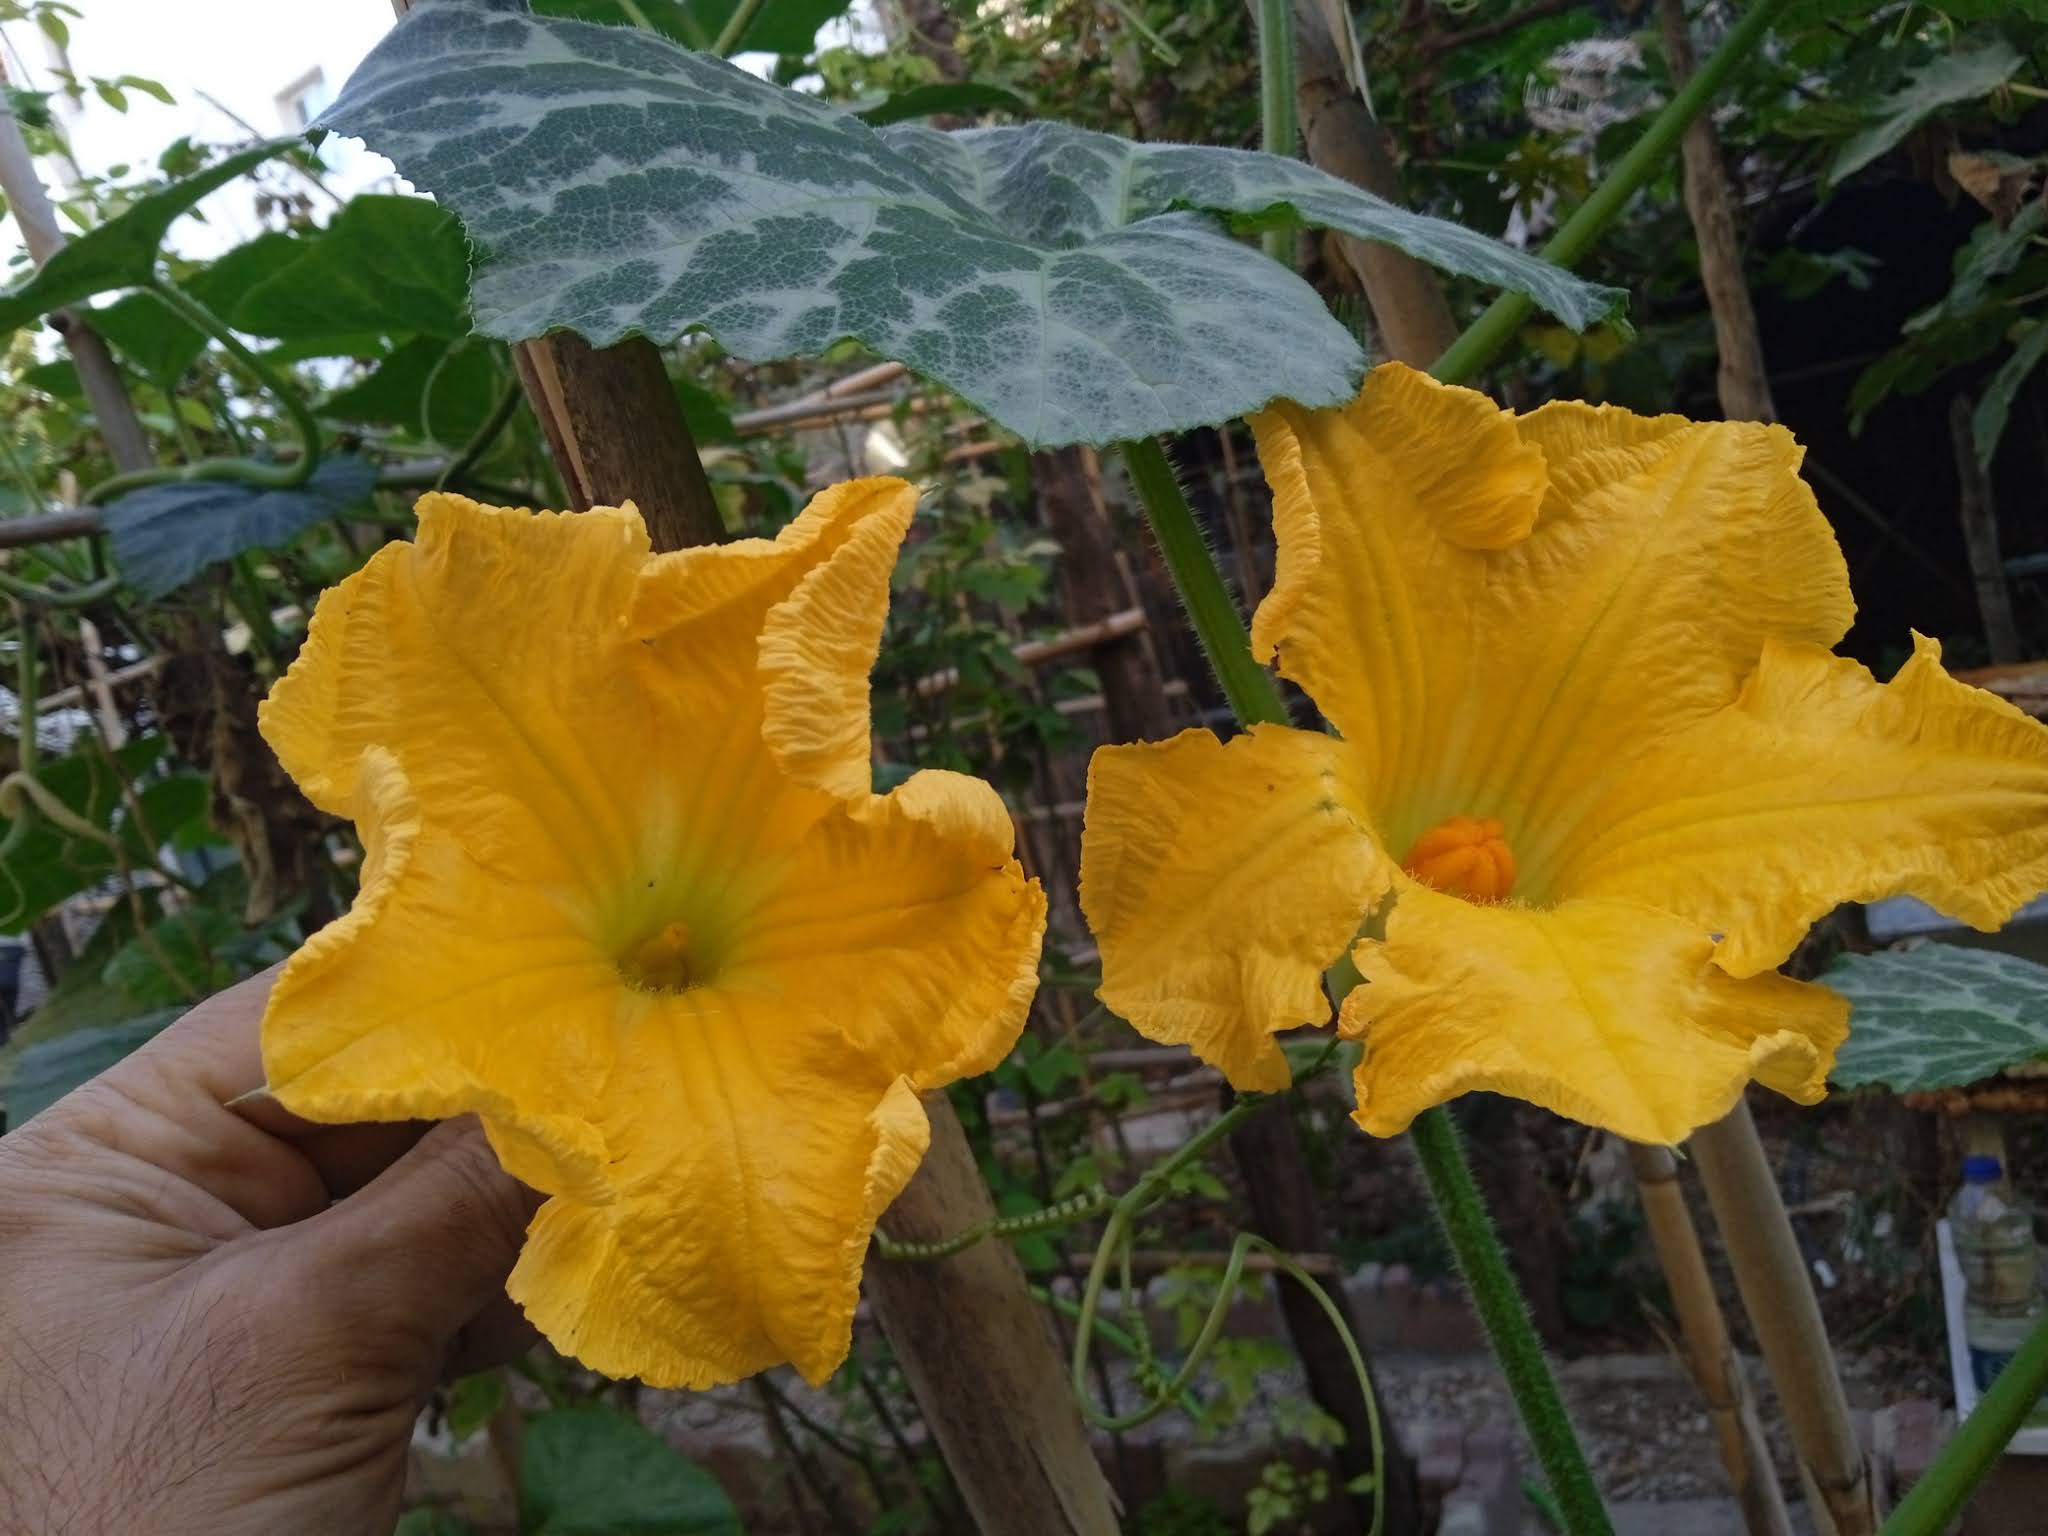 When you compare male and female flowers side by side it's easy to see the differences. Male squash flowers have a straight stem behind the bloom with no swelling. Just look inside the flower and you can see the stamens, which carry the pollen.